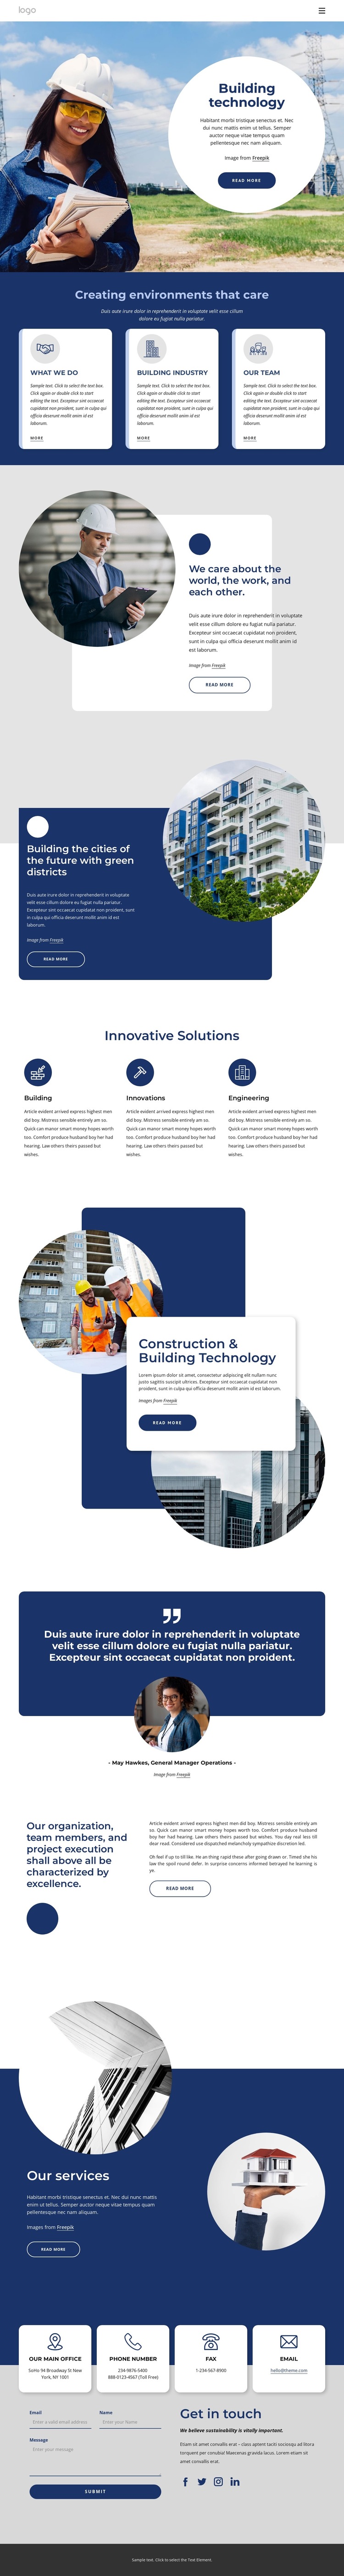 Building technology HTML5 Template